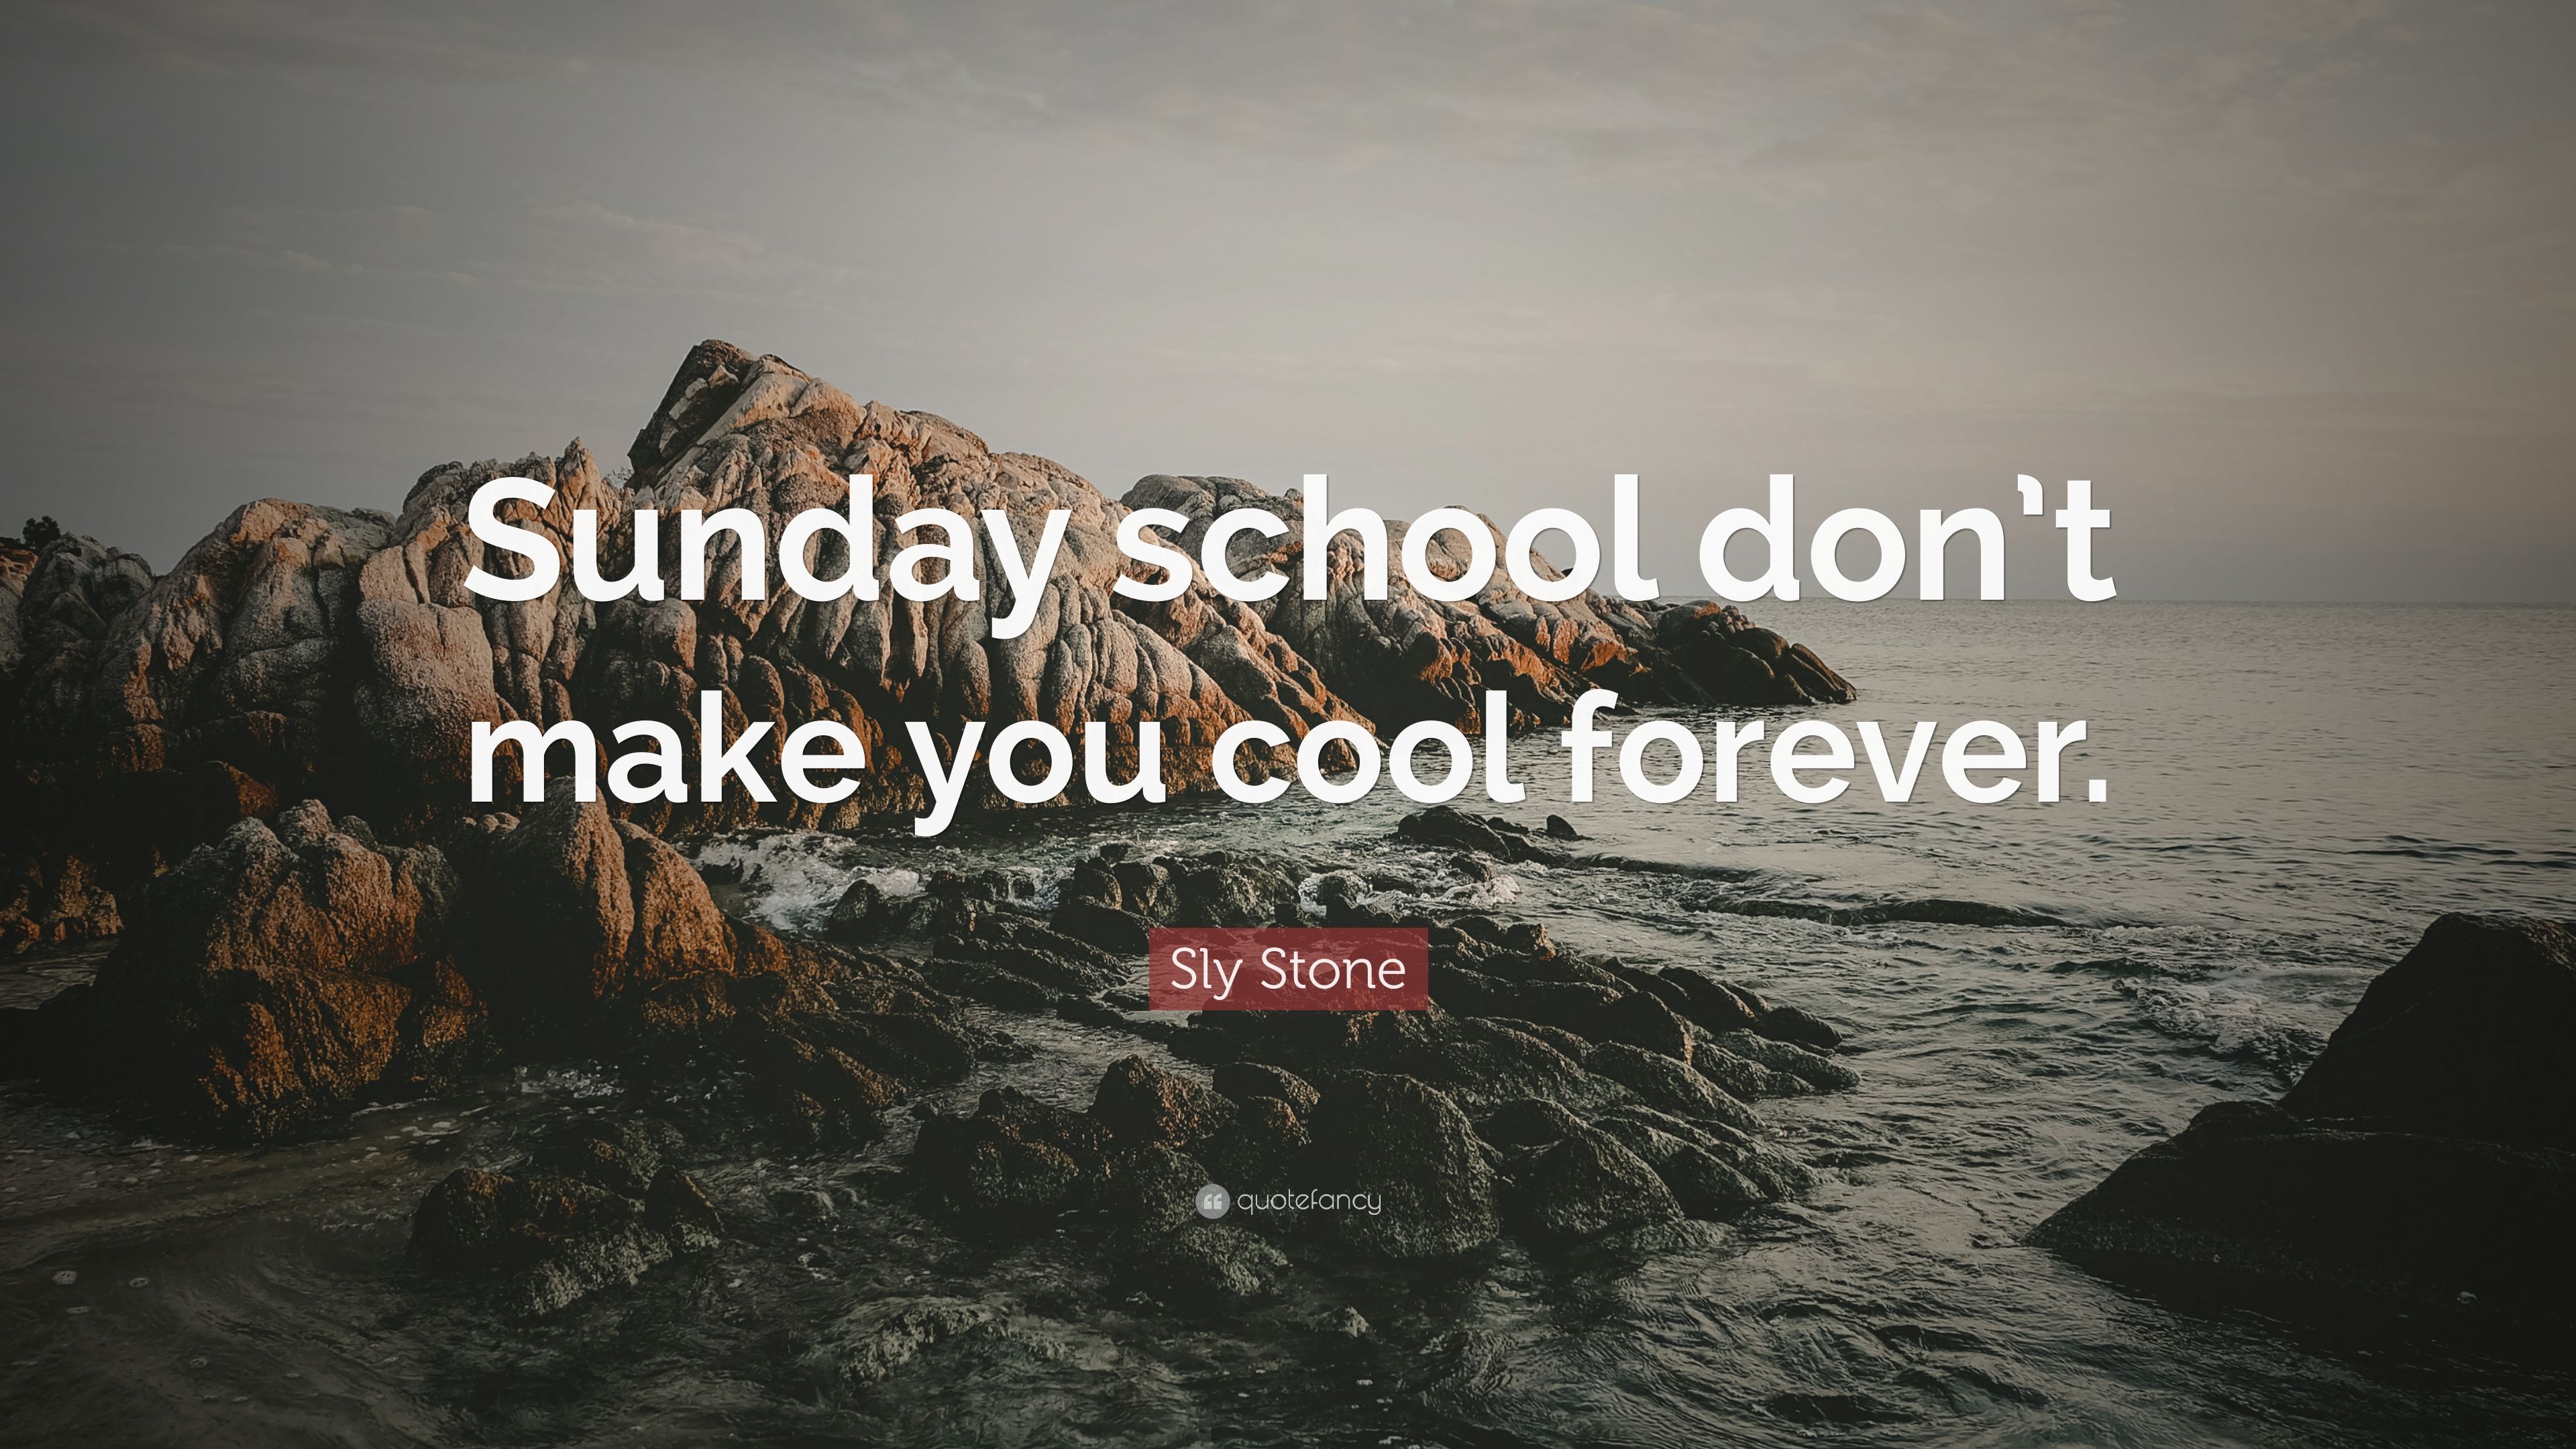 Sly Stone Quote: “Sunday school don't make you cool forever.”